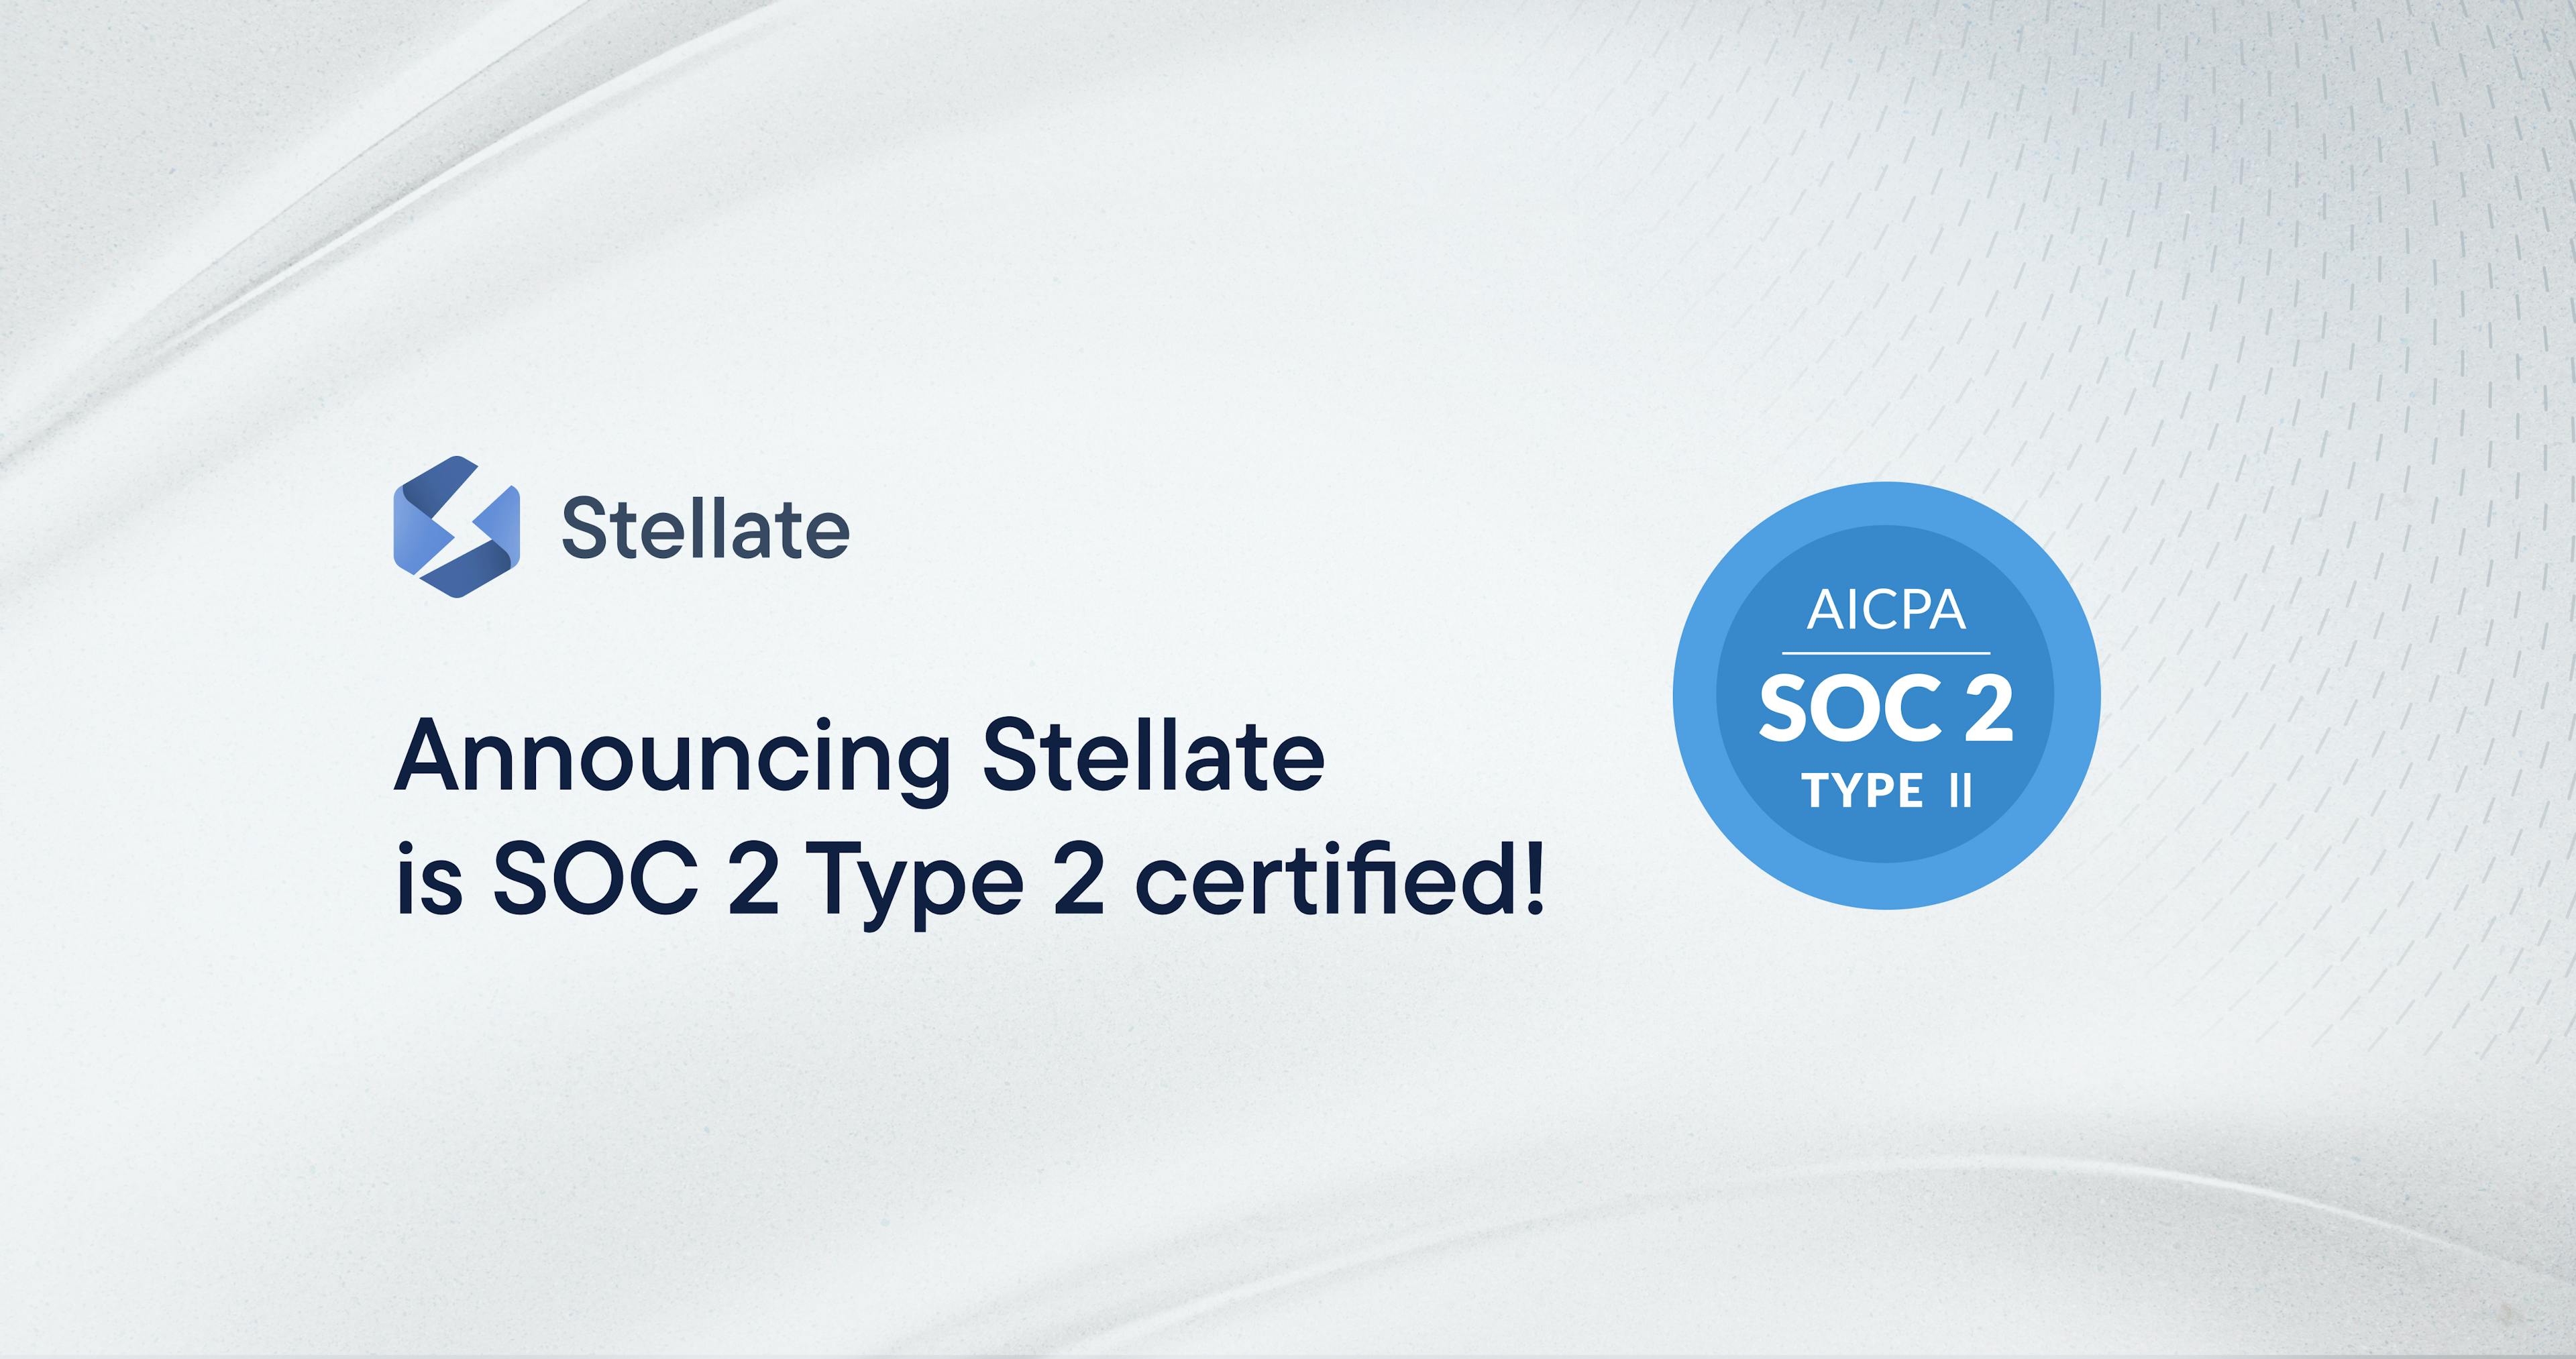 Announcing Stellate is SOC 2 Type 2 certified!